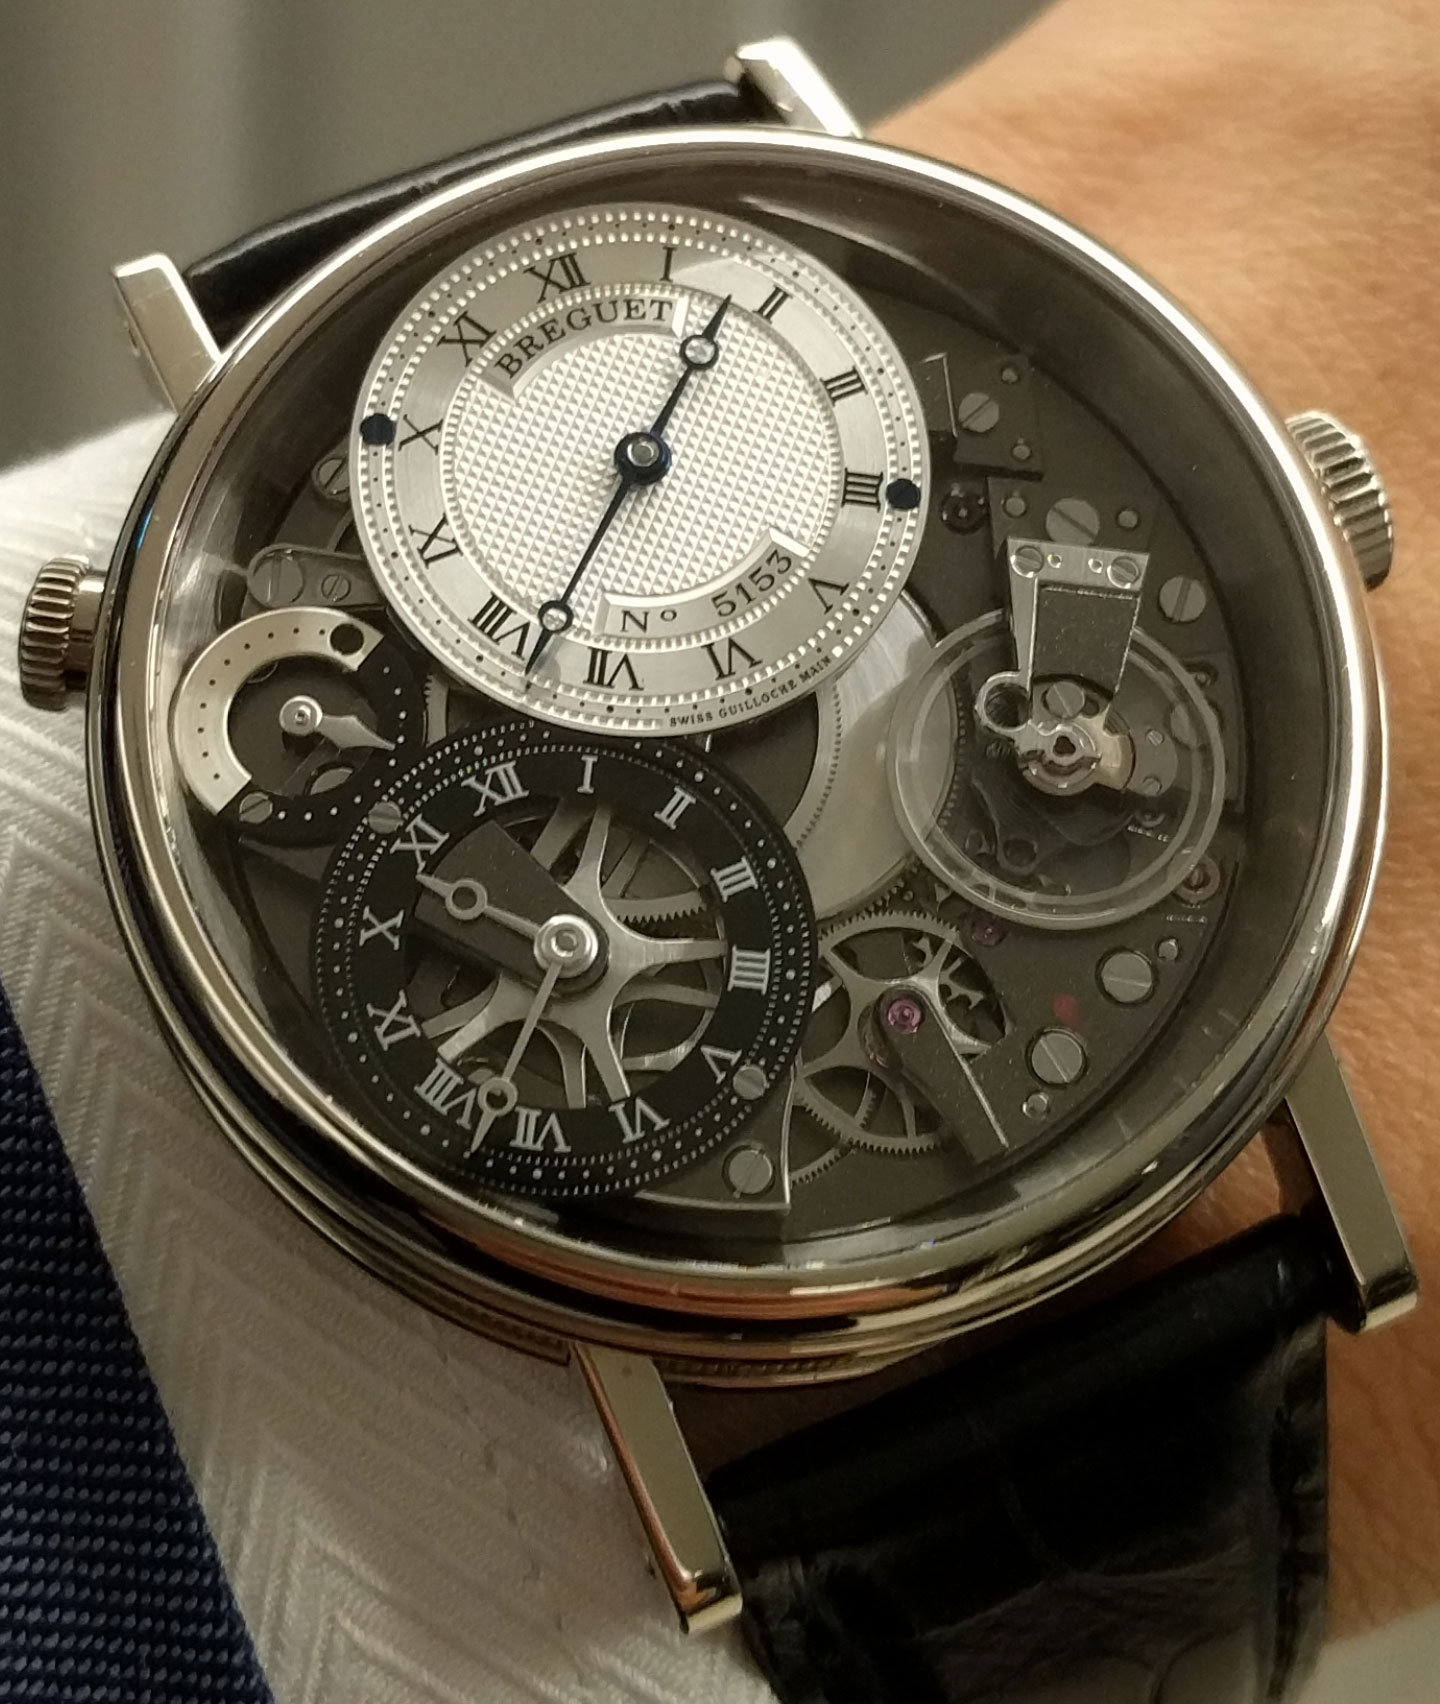 Breguet Tradition GMT: Why I Wear This Watch – Review